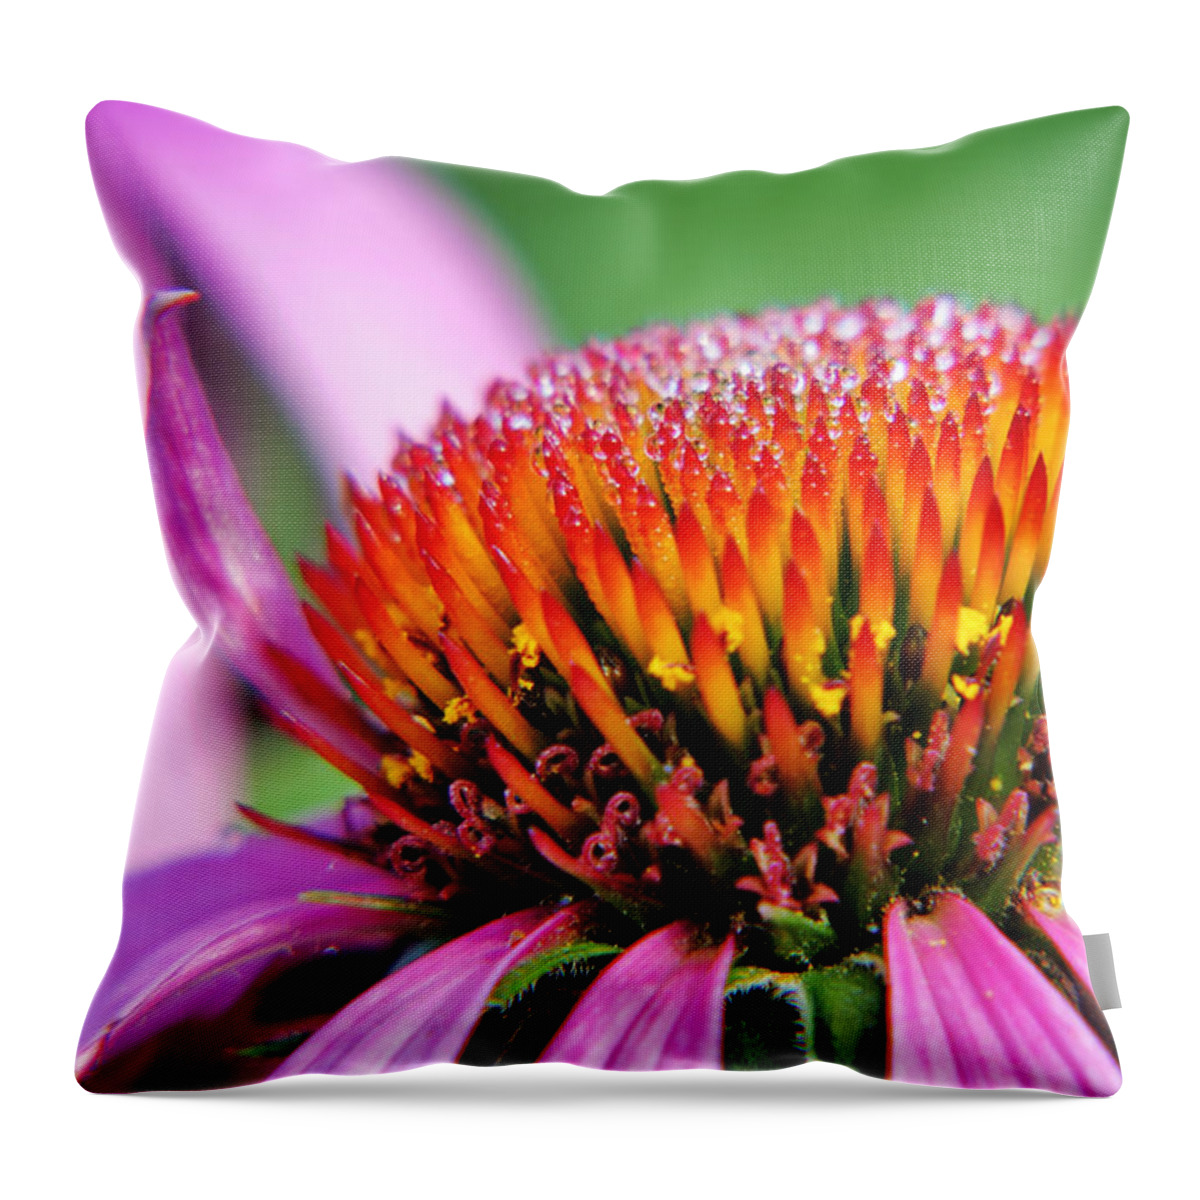 Purple Cone Flower Throw Pillow featuring the photograph Dew-laden Purple Cone Flower by Jason Politte